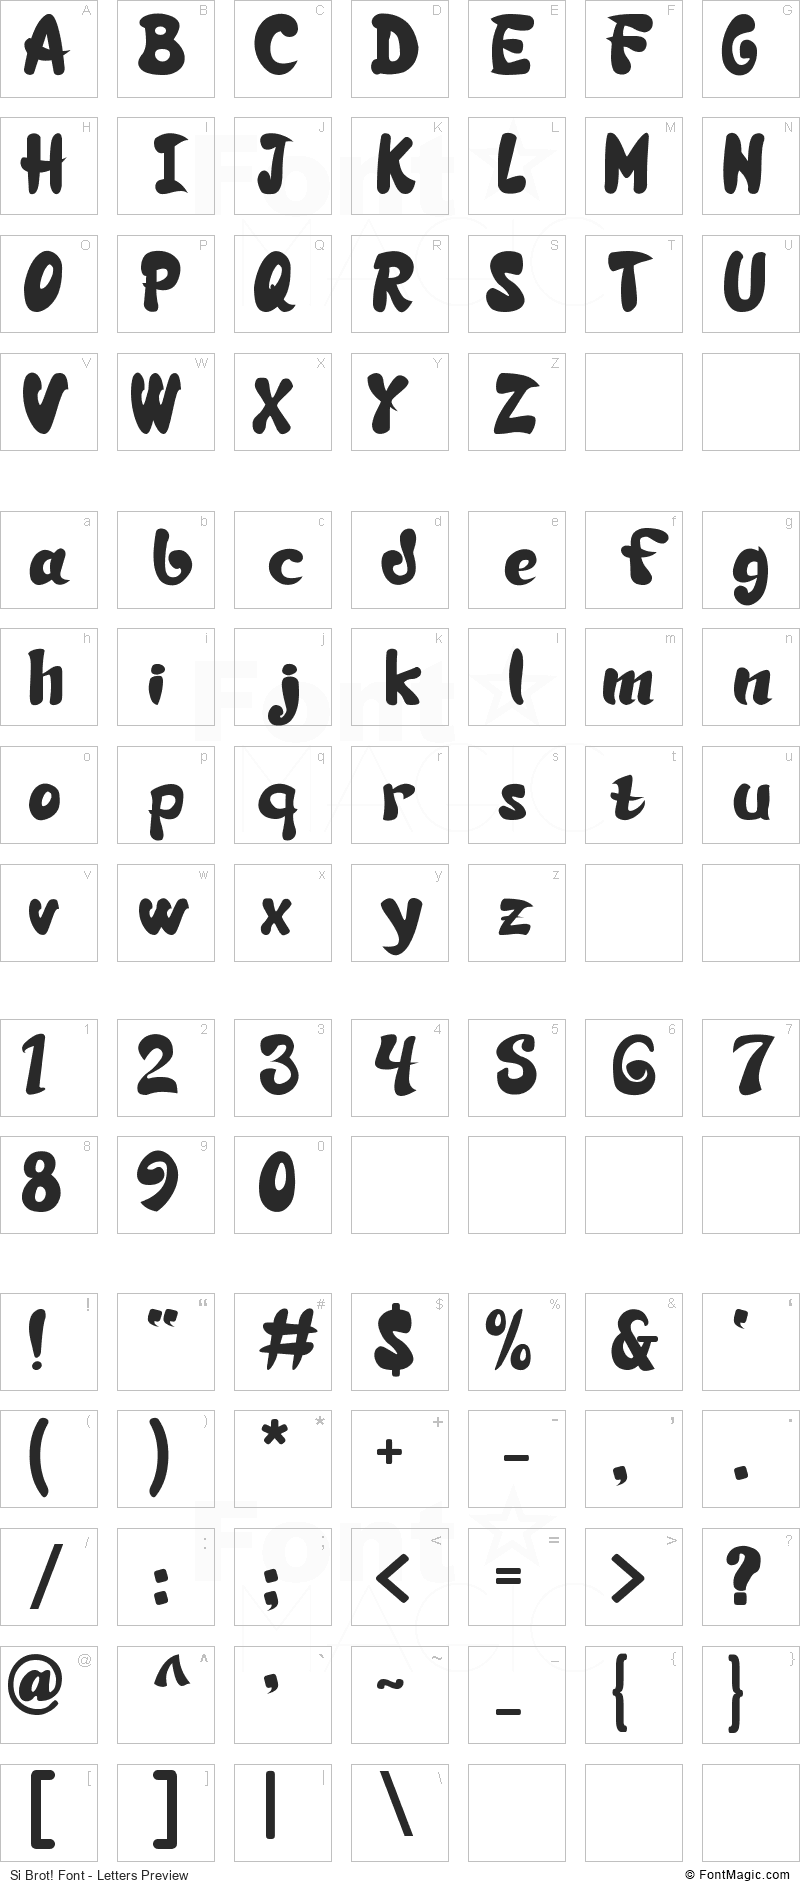 Si Brot! Font - All Latters Preview Chart